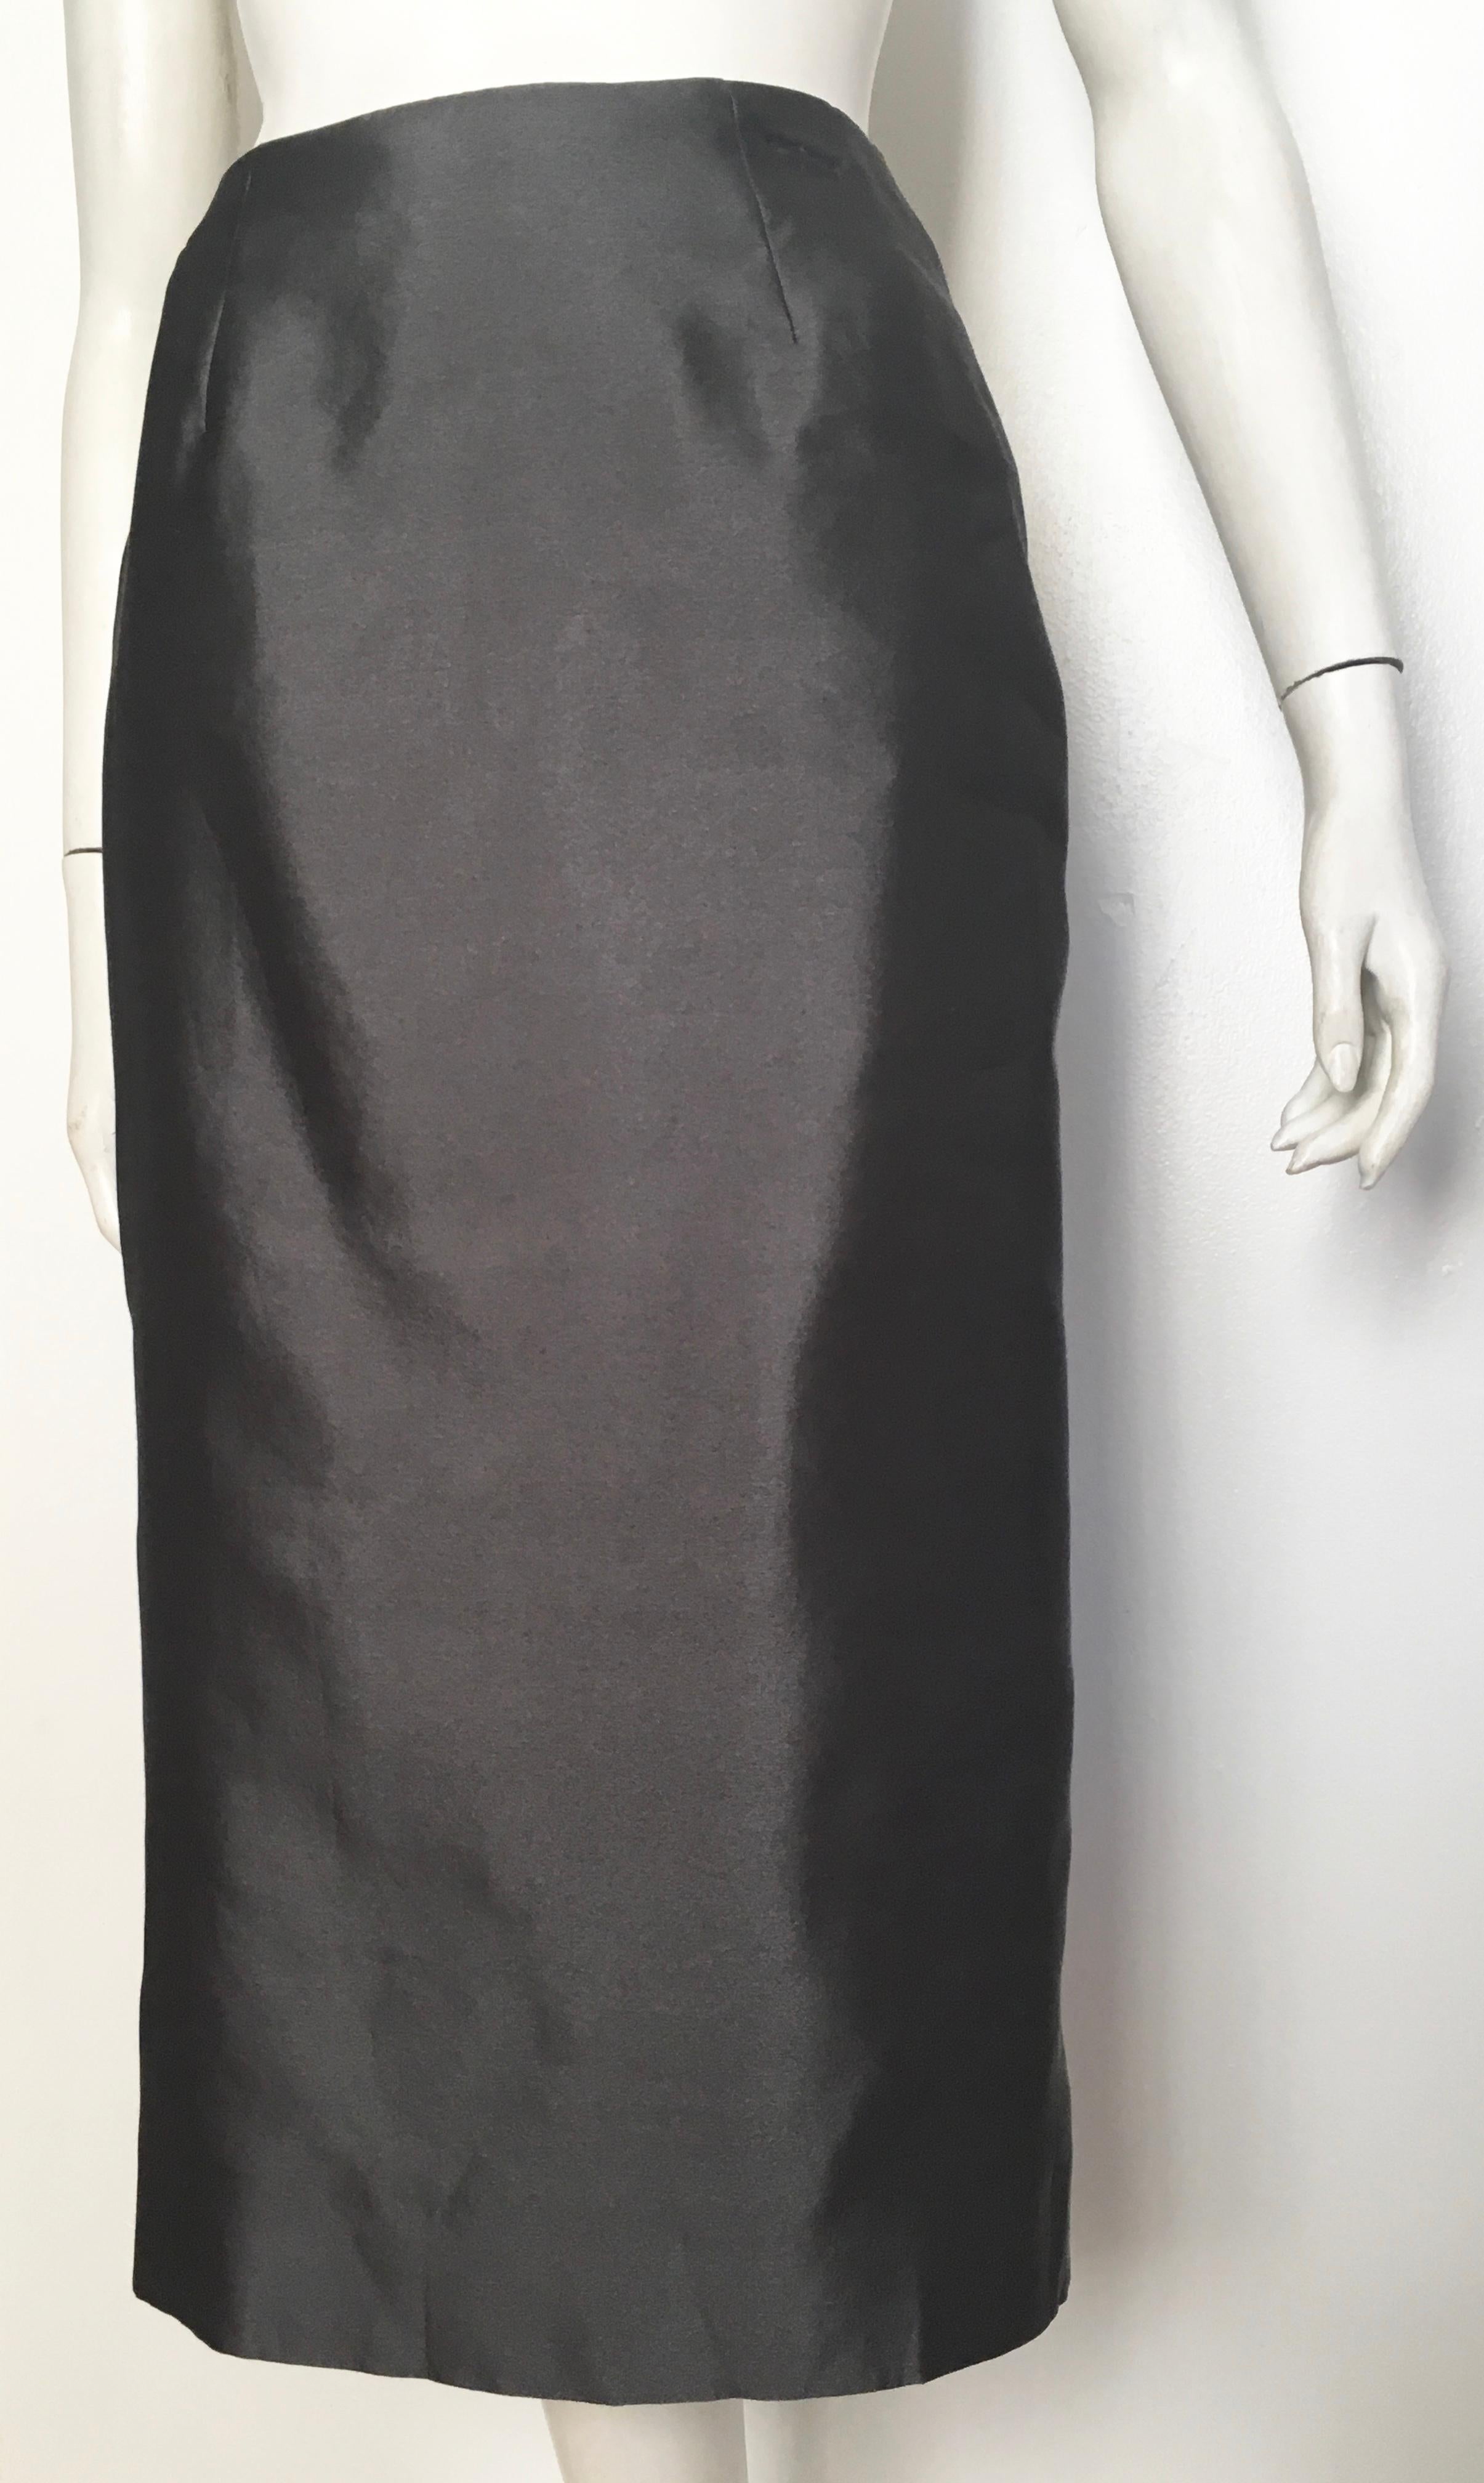 Donna Karan for Bergdorf Goodman 1990s Gray Silk Long Skirt Size 4. In Excellent Condition For Sale In Atlanta, GA